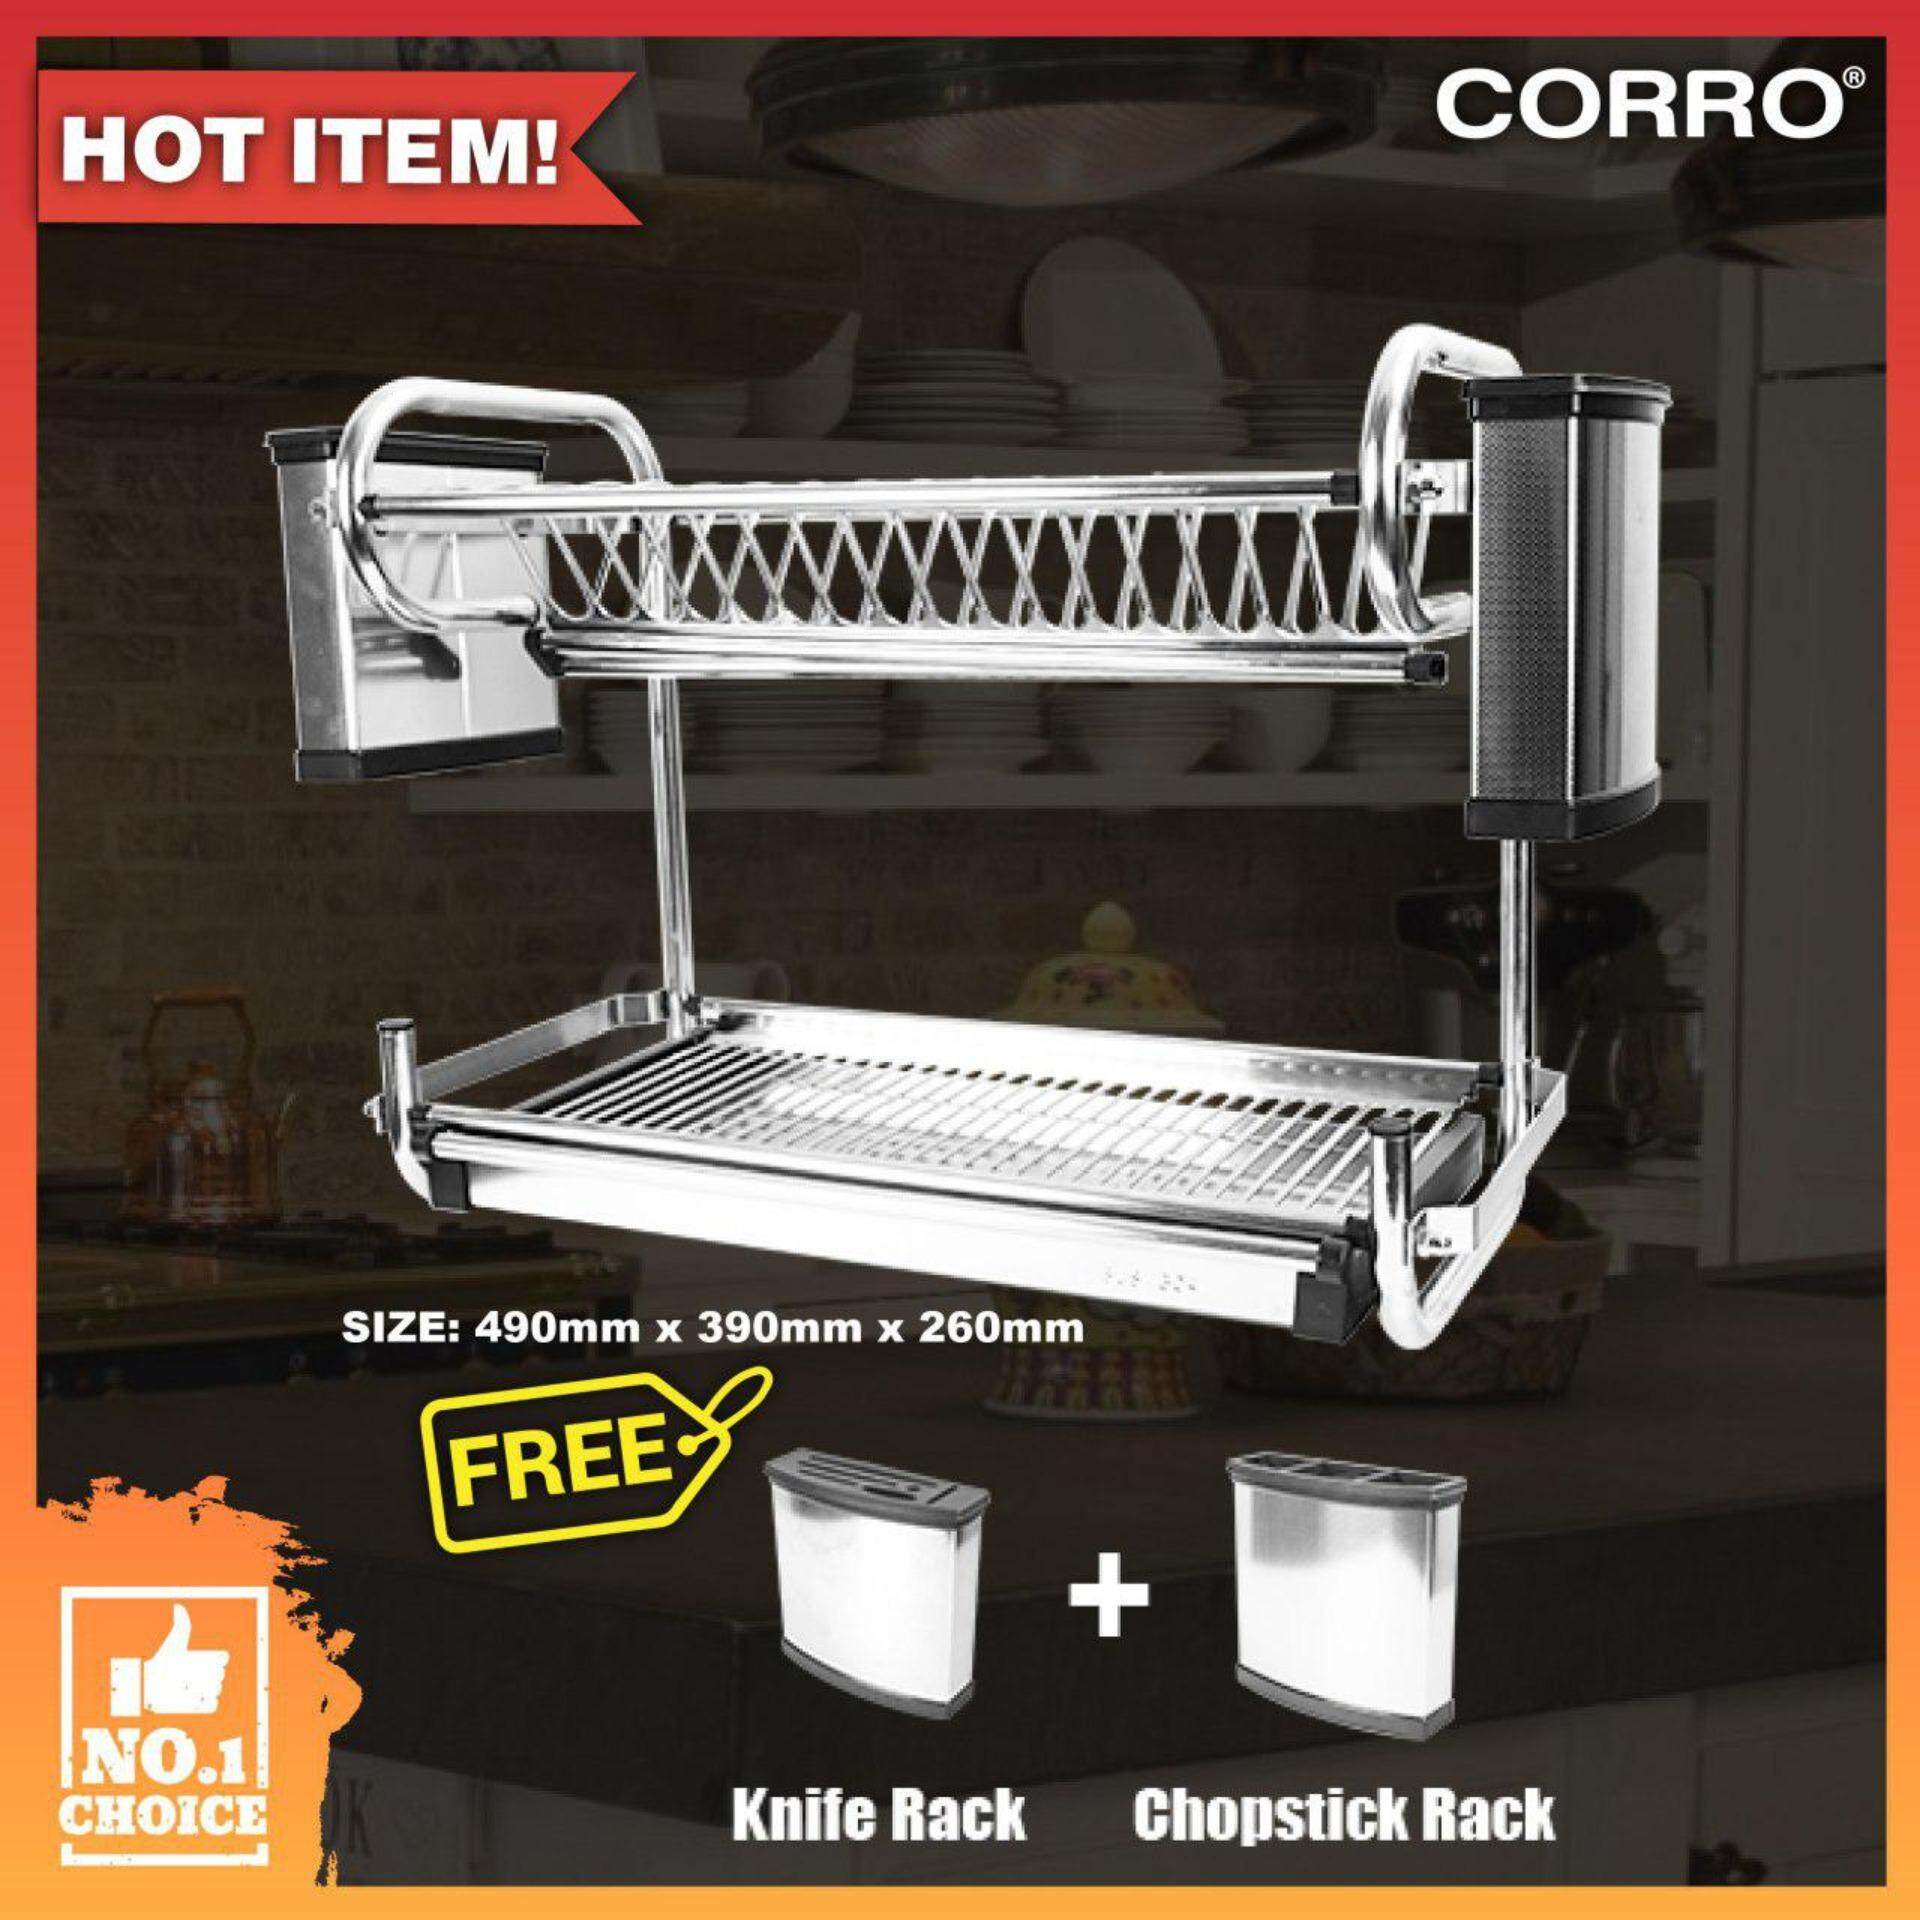 CORRO High Quality SUS304 100% Stainless Steel 2 Tier Dish Rack - L490 x H390 x W260mm